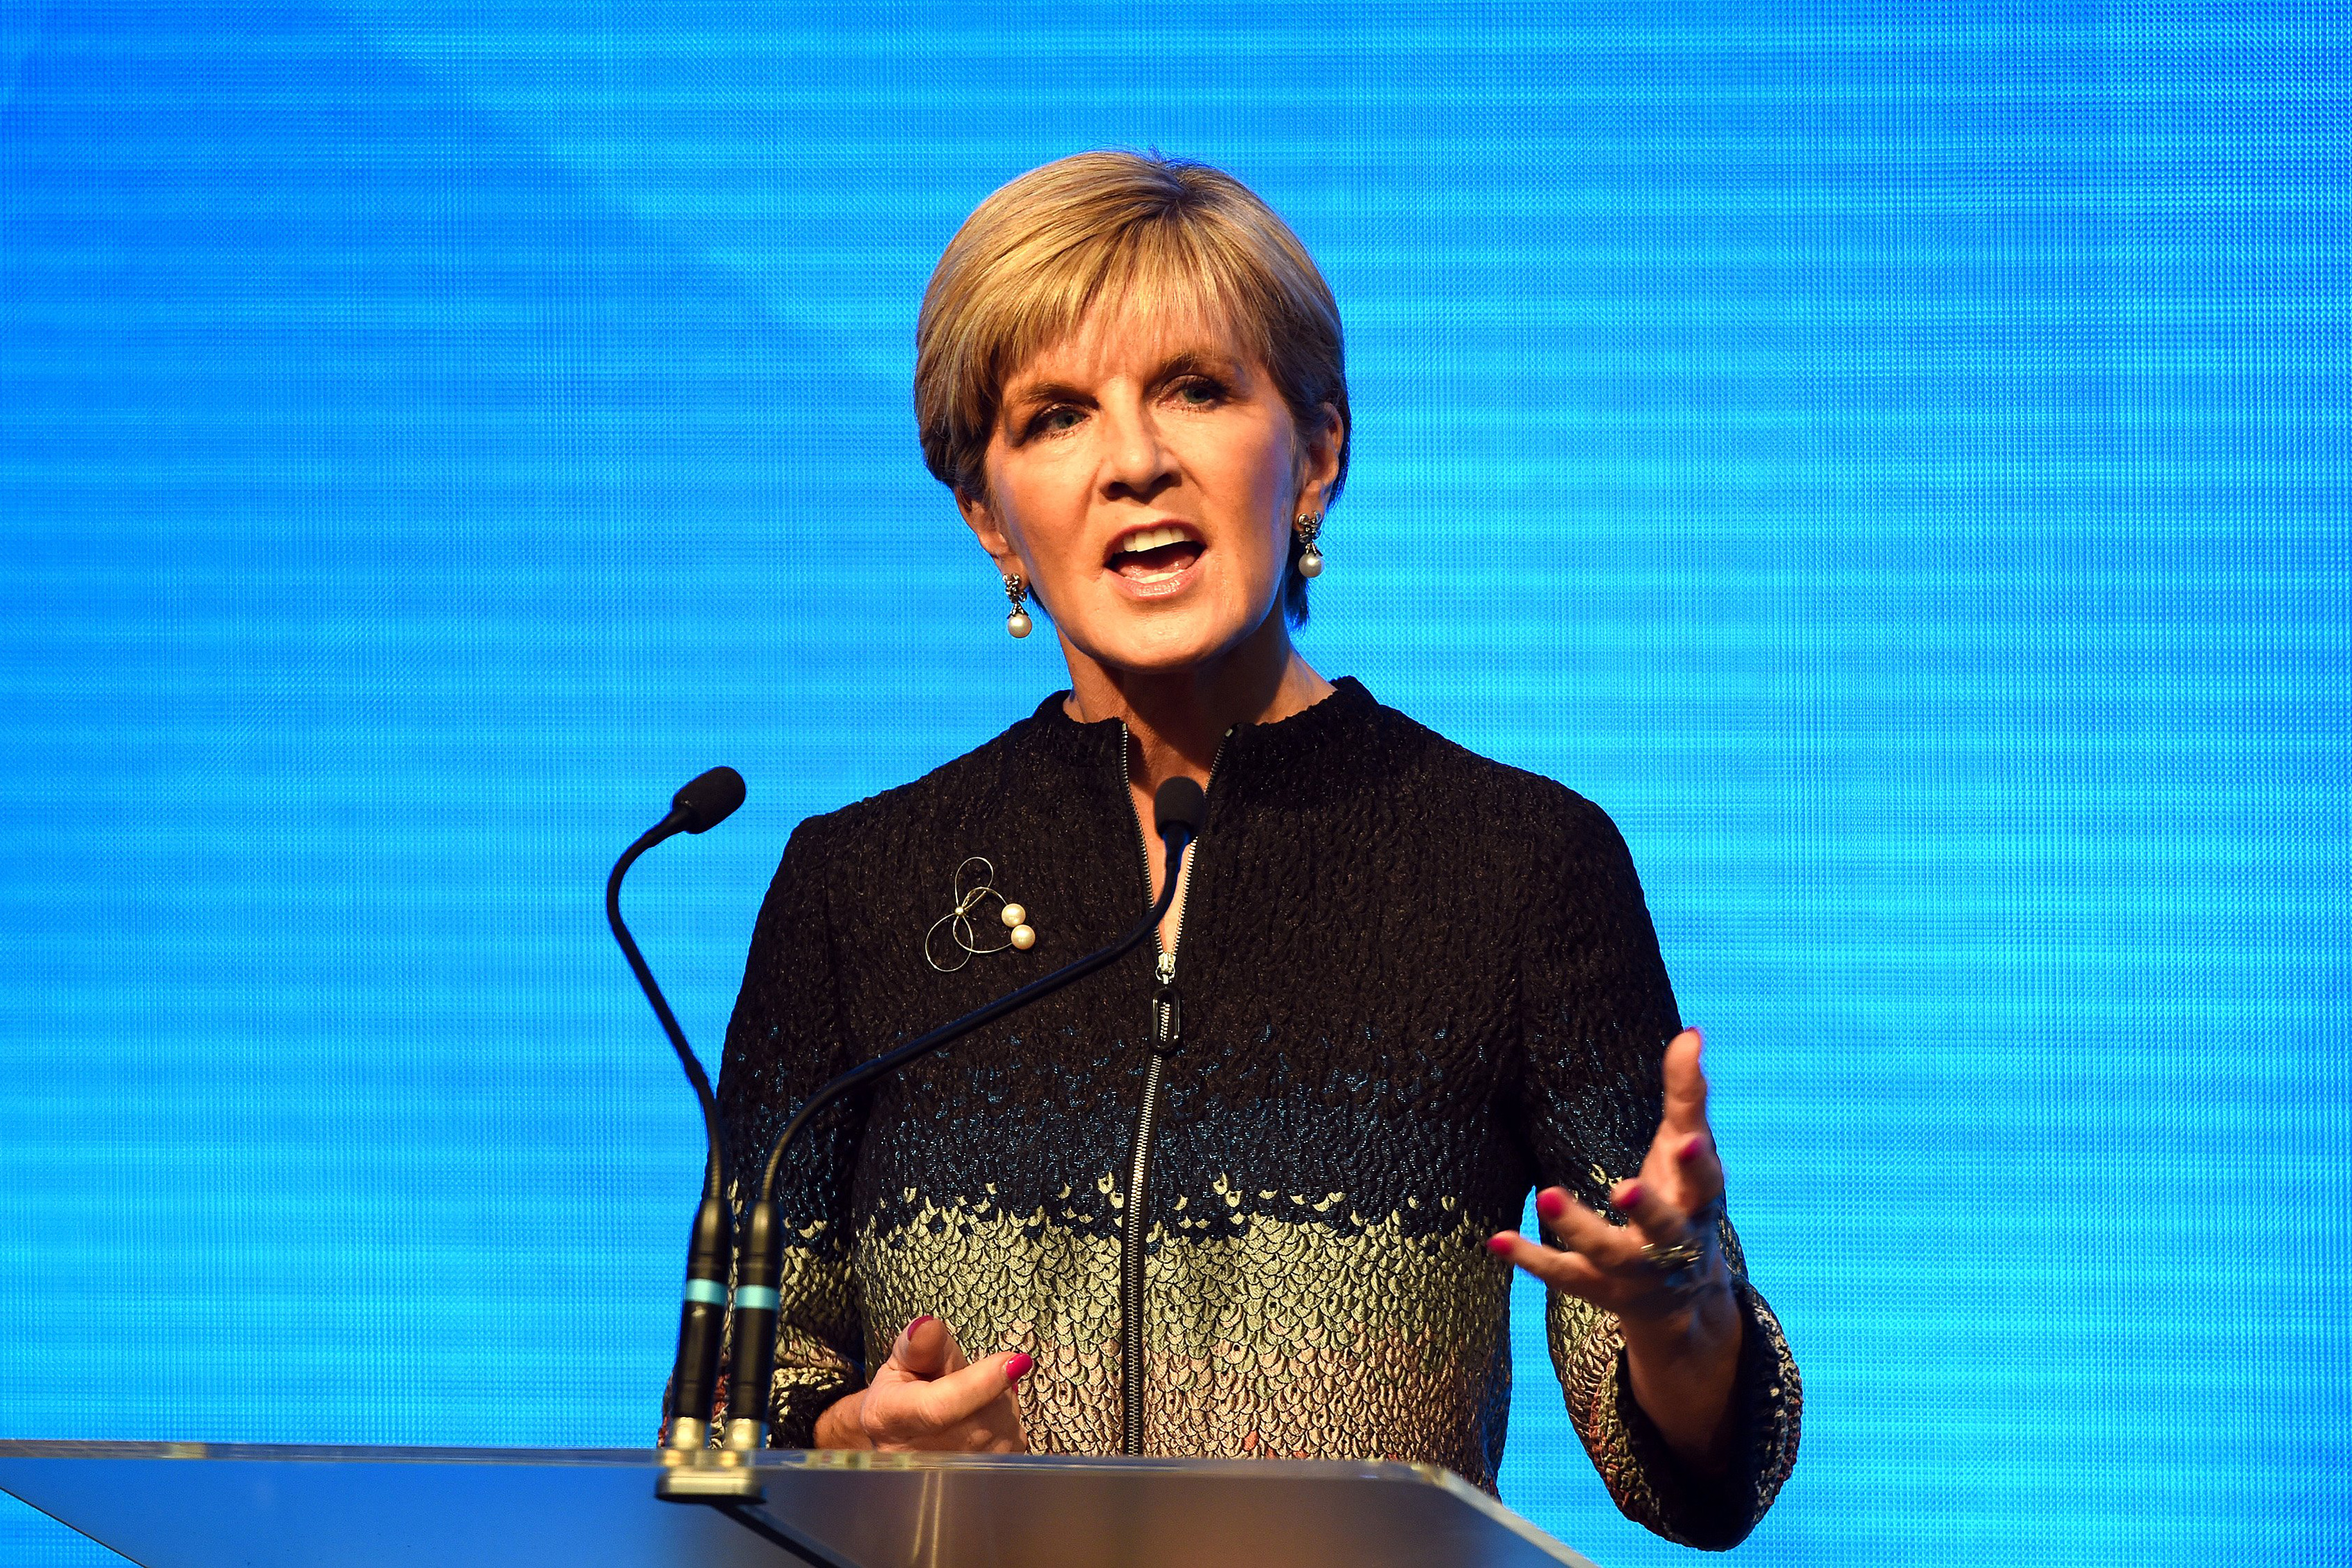 Australian foreign minister and deputy Leader of the Liberal Party, Julie Bishop, speaks at the Coalition Campaign Launch in Sydney on June 26, 2016.  Australia's prime minister promised stability and strong economic policy in the wake of global turmoil sparked by Britain's Brexit vote, as he campaigned June 26 ahead of next week's national polls. / AFP PHOTO / SAEED KHAN